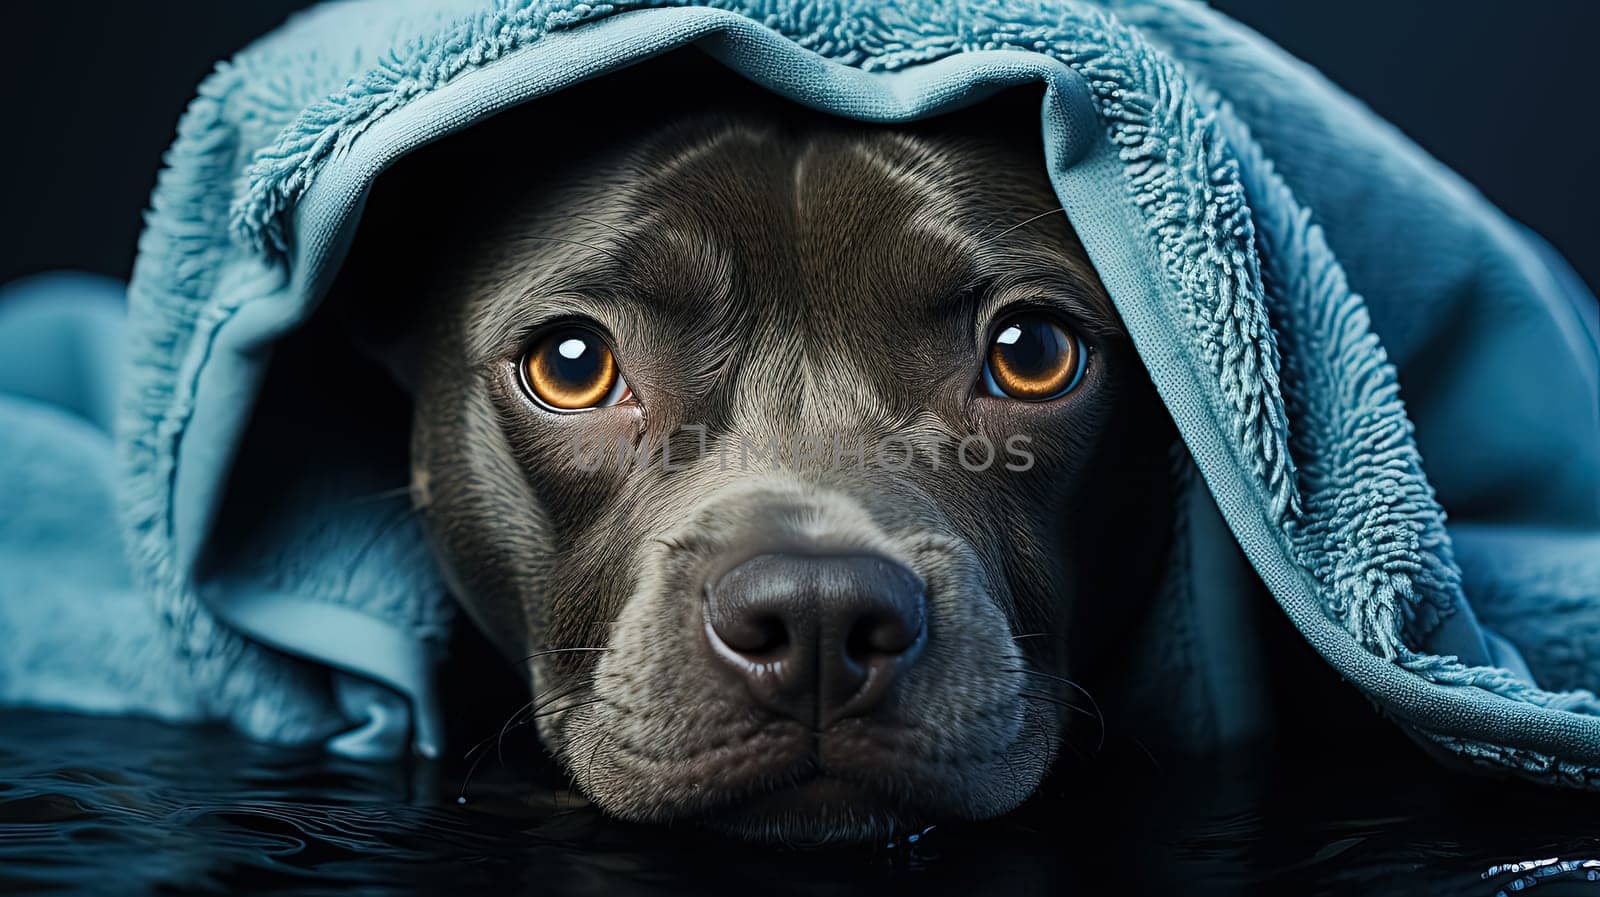 A pit bull, wrapped snugly in a towel after a bath, sits against a calming blue backdrop, showcasing tranquility and post-bath relaxation for pets.